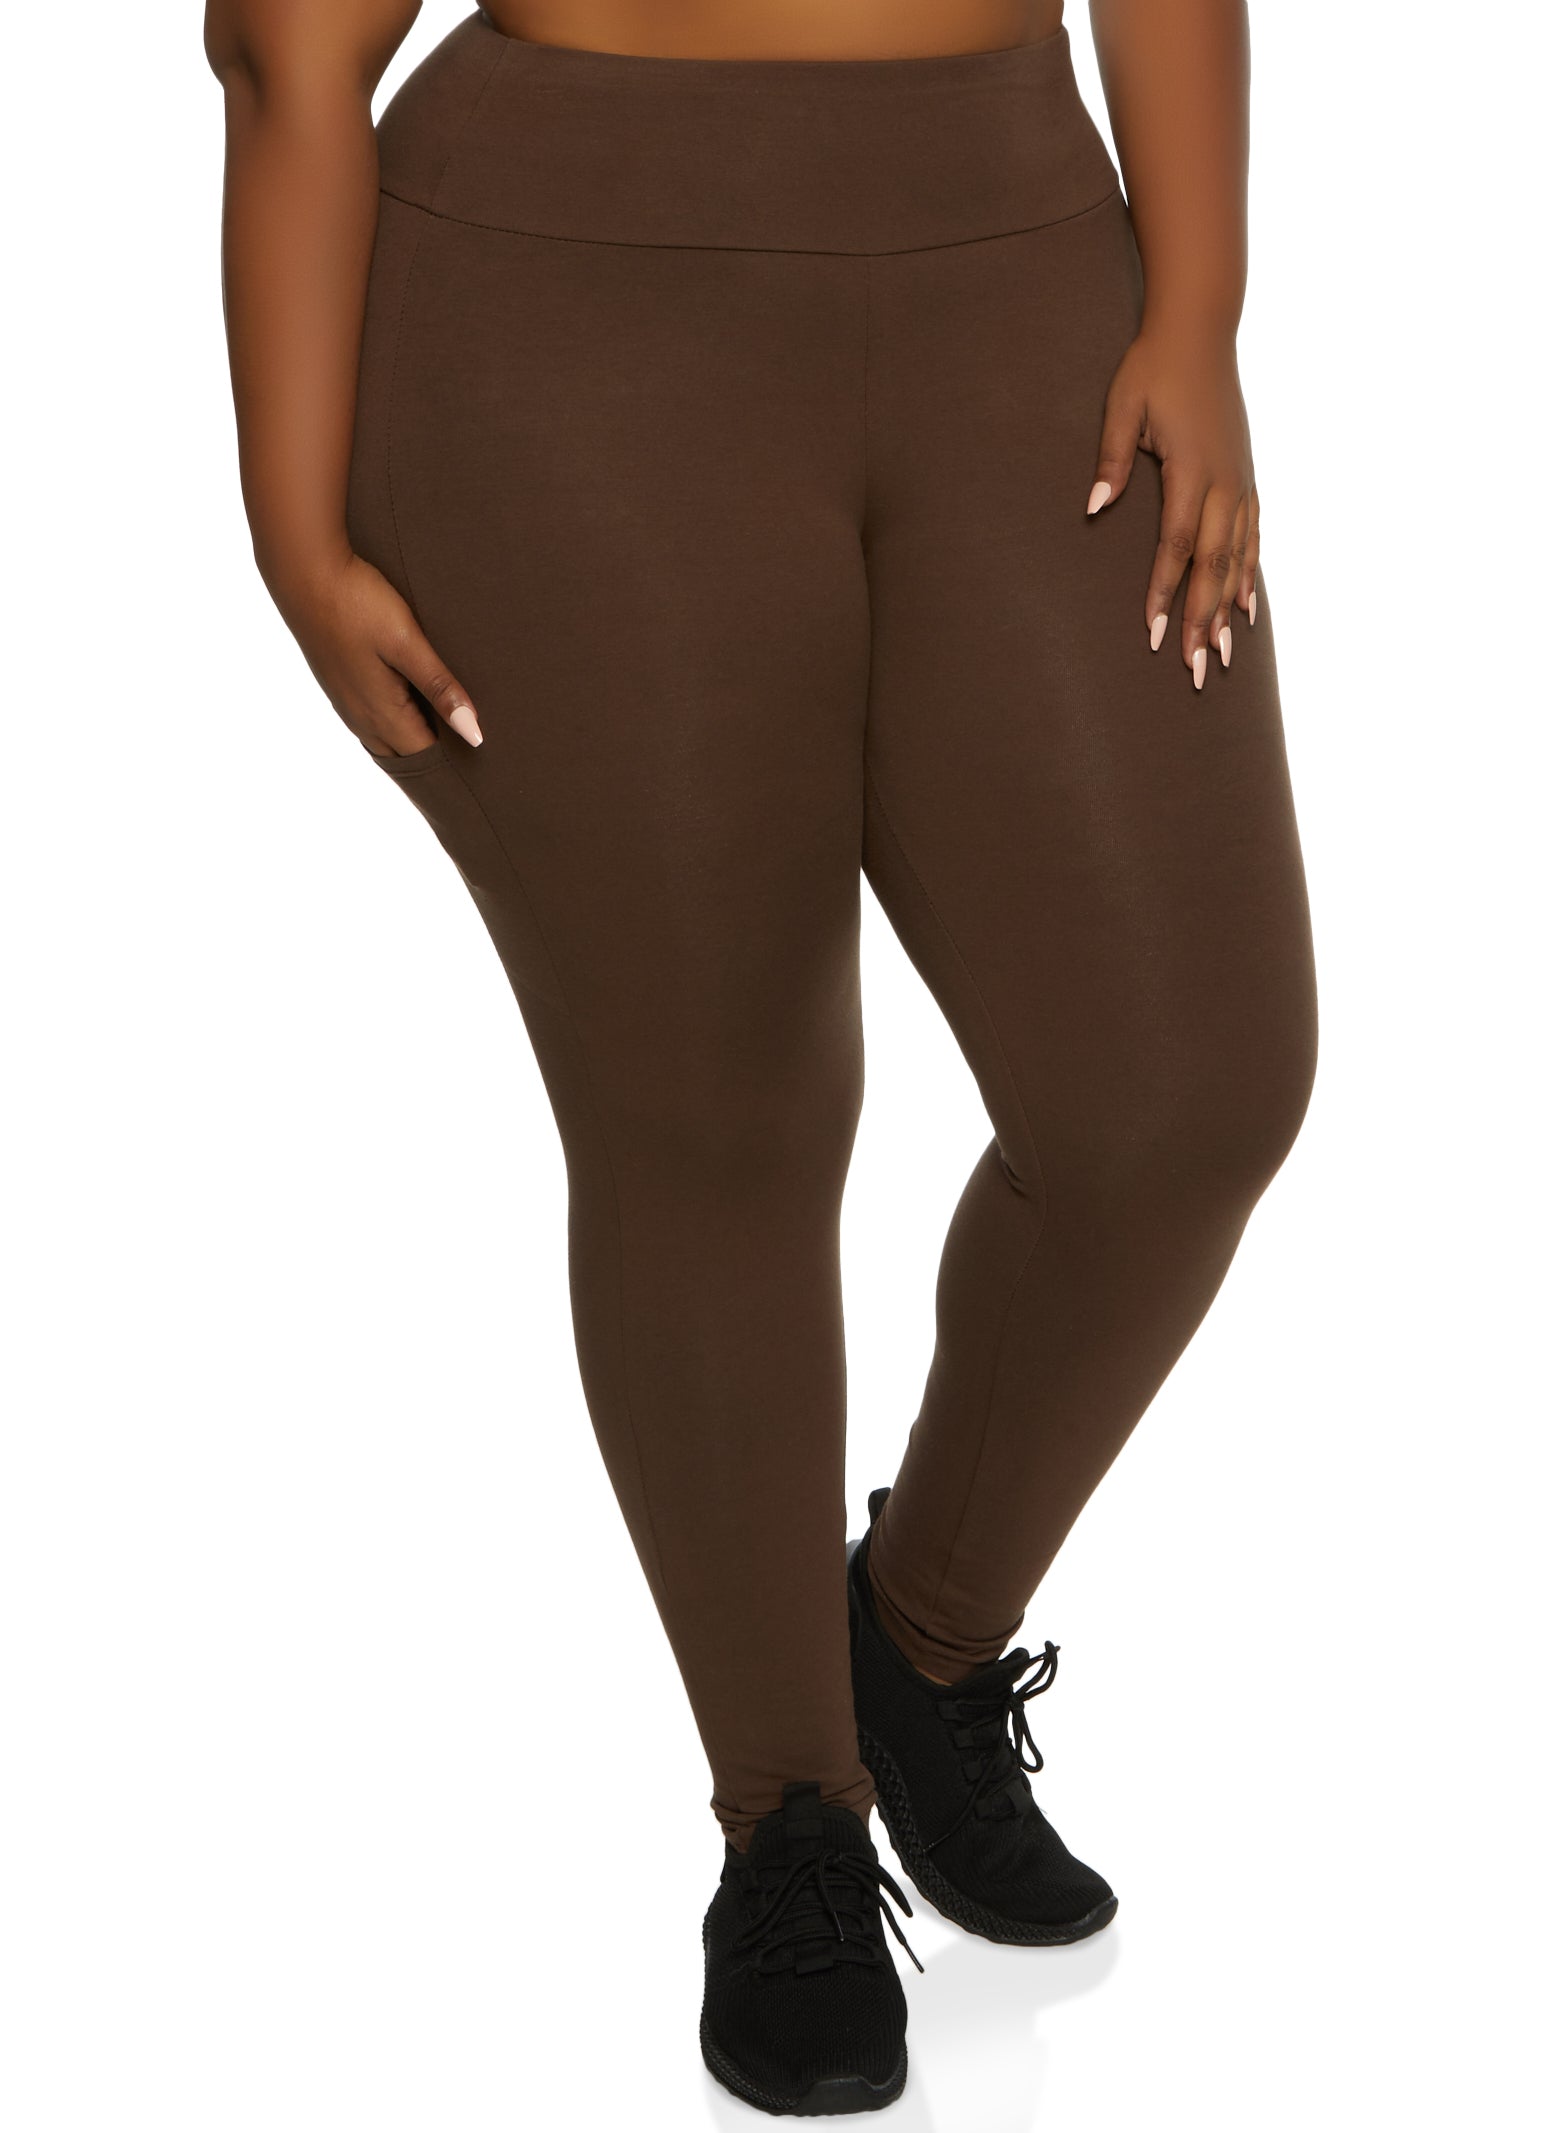 Plus Size Solid High Waist Cell Phone Pocket Leggings - Brown